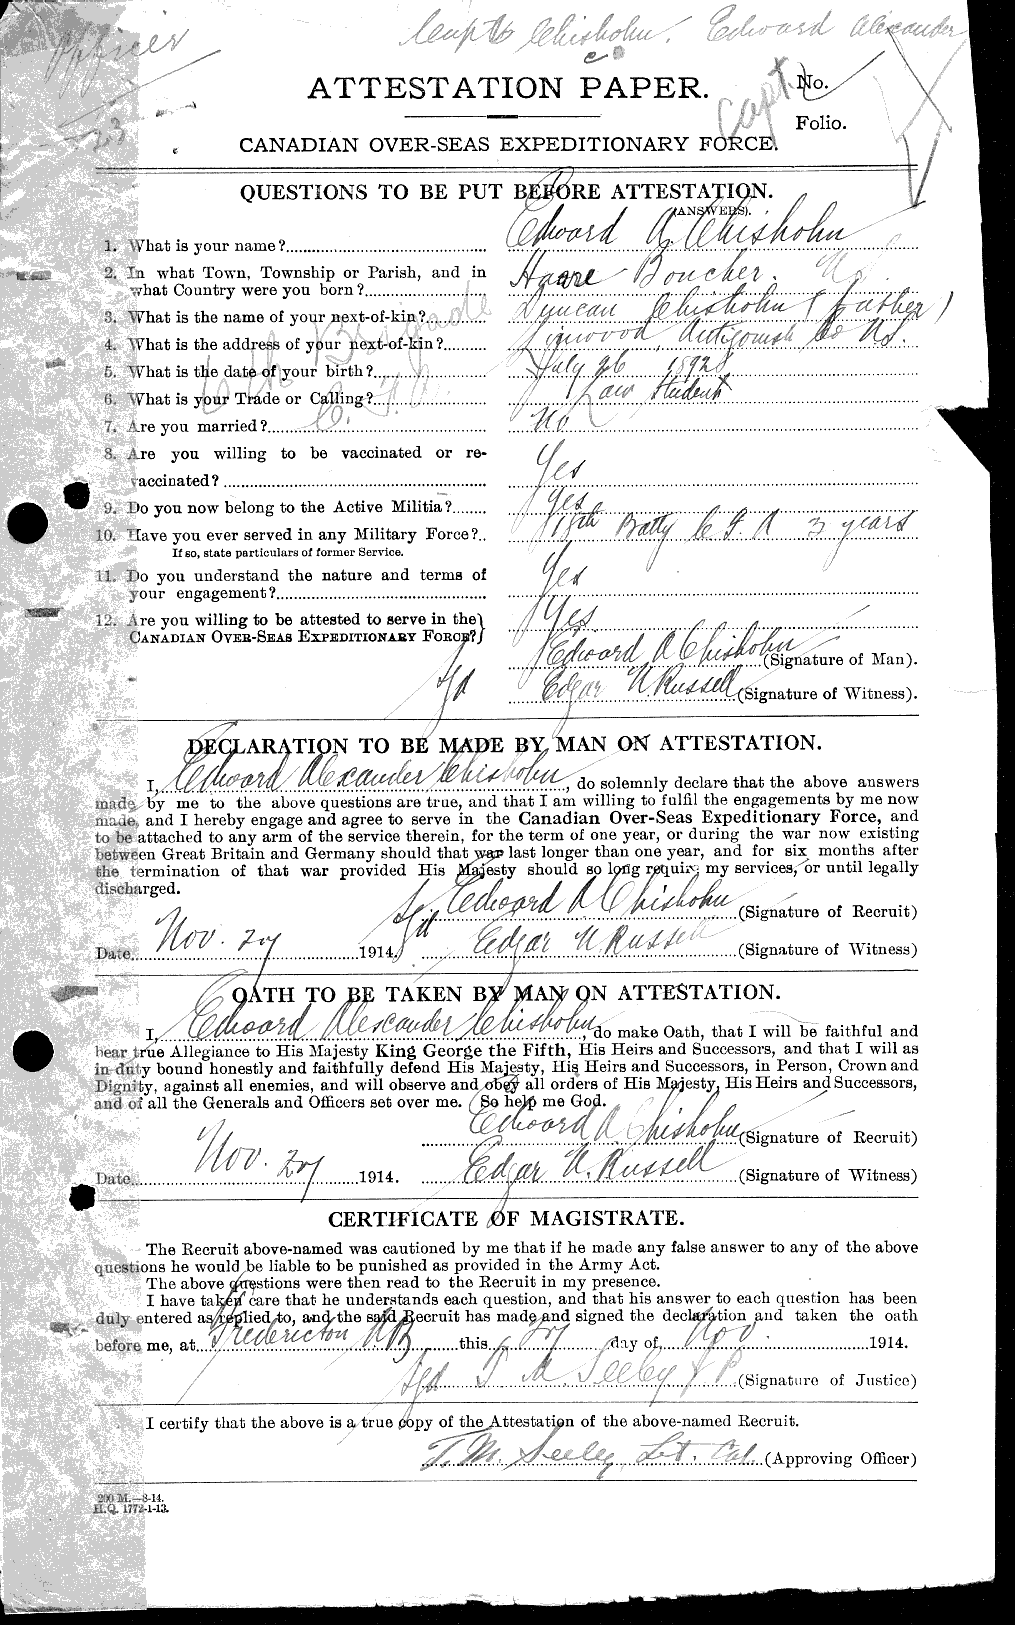 Personnel Records of the First World War - CEF 018274a